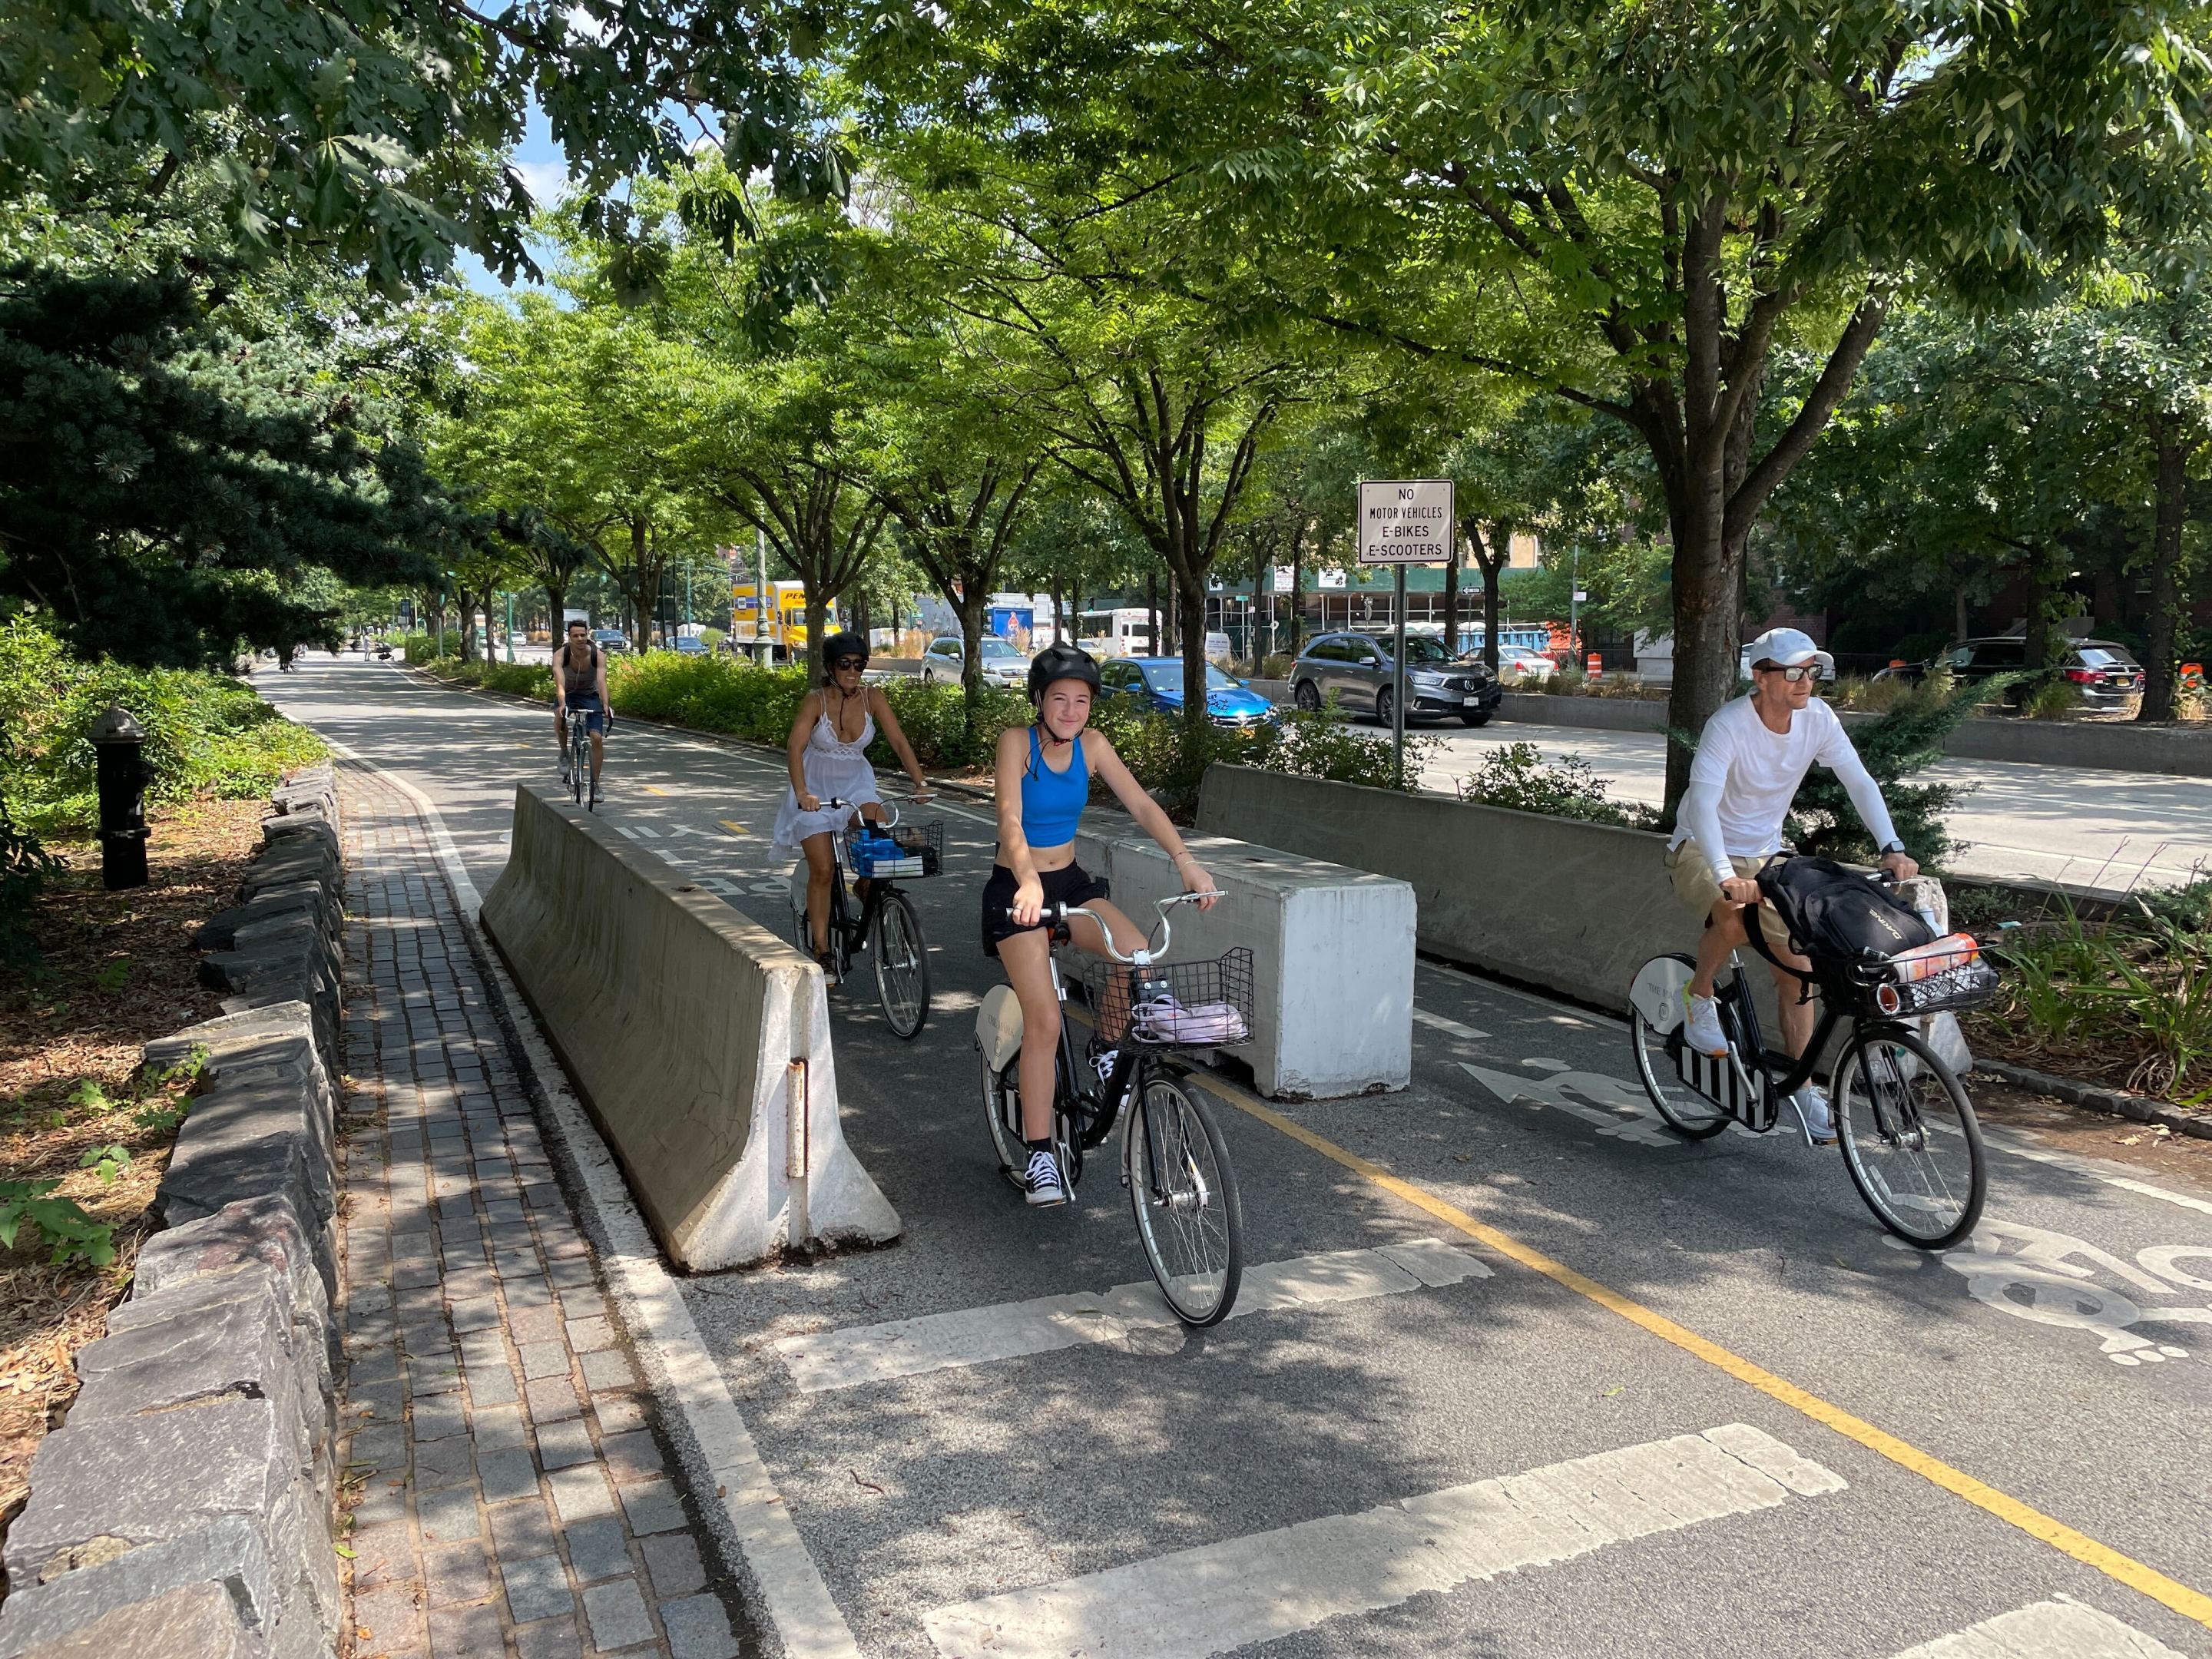 A group of cyclists bike through concrete bollards on the crowded Hudson River Greenway.